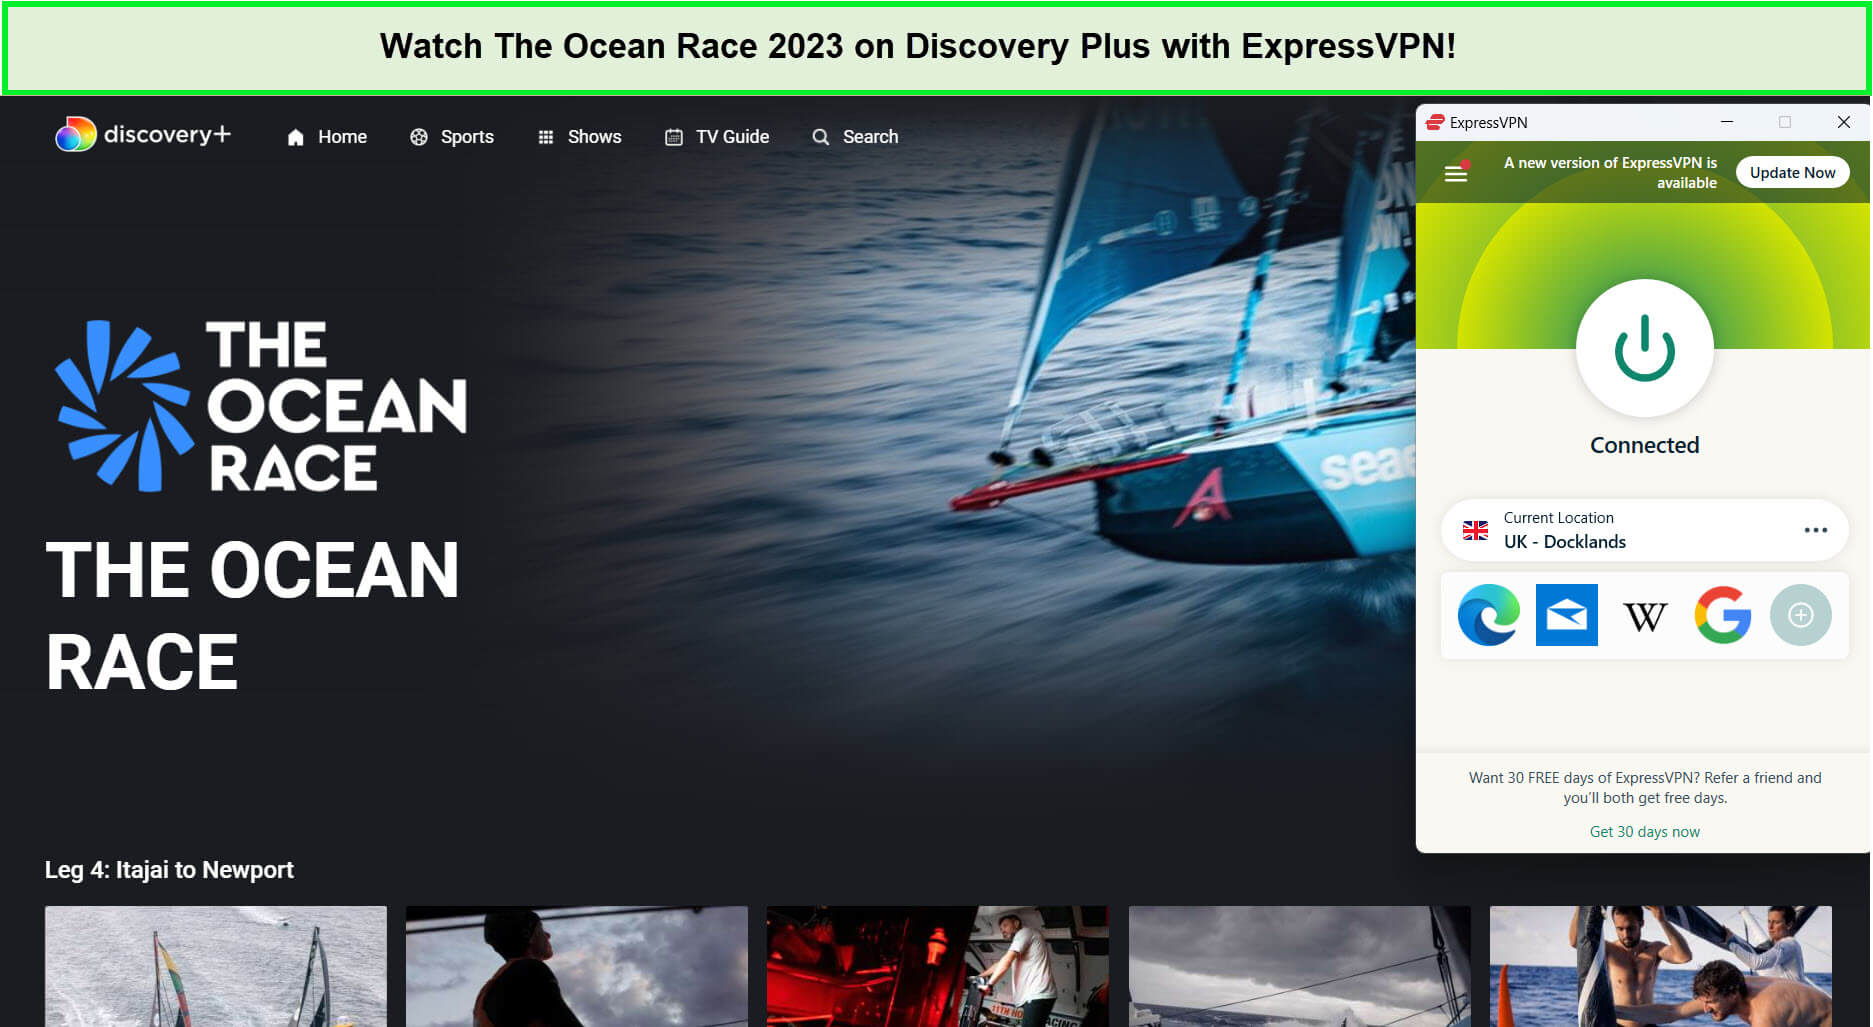 expressvpn-unblocks-the-ocean-race-2023-live-in-Japan-on-discovery-plus